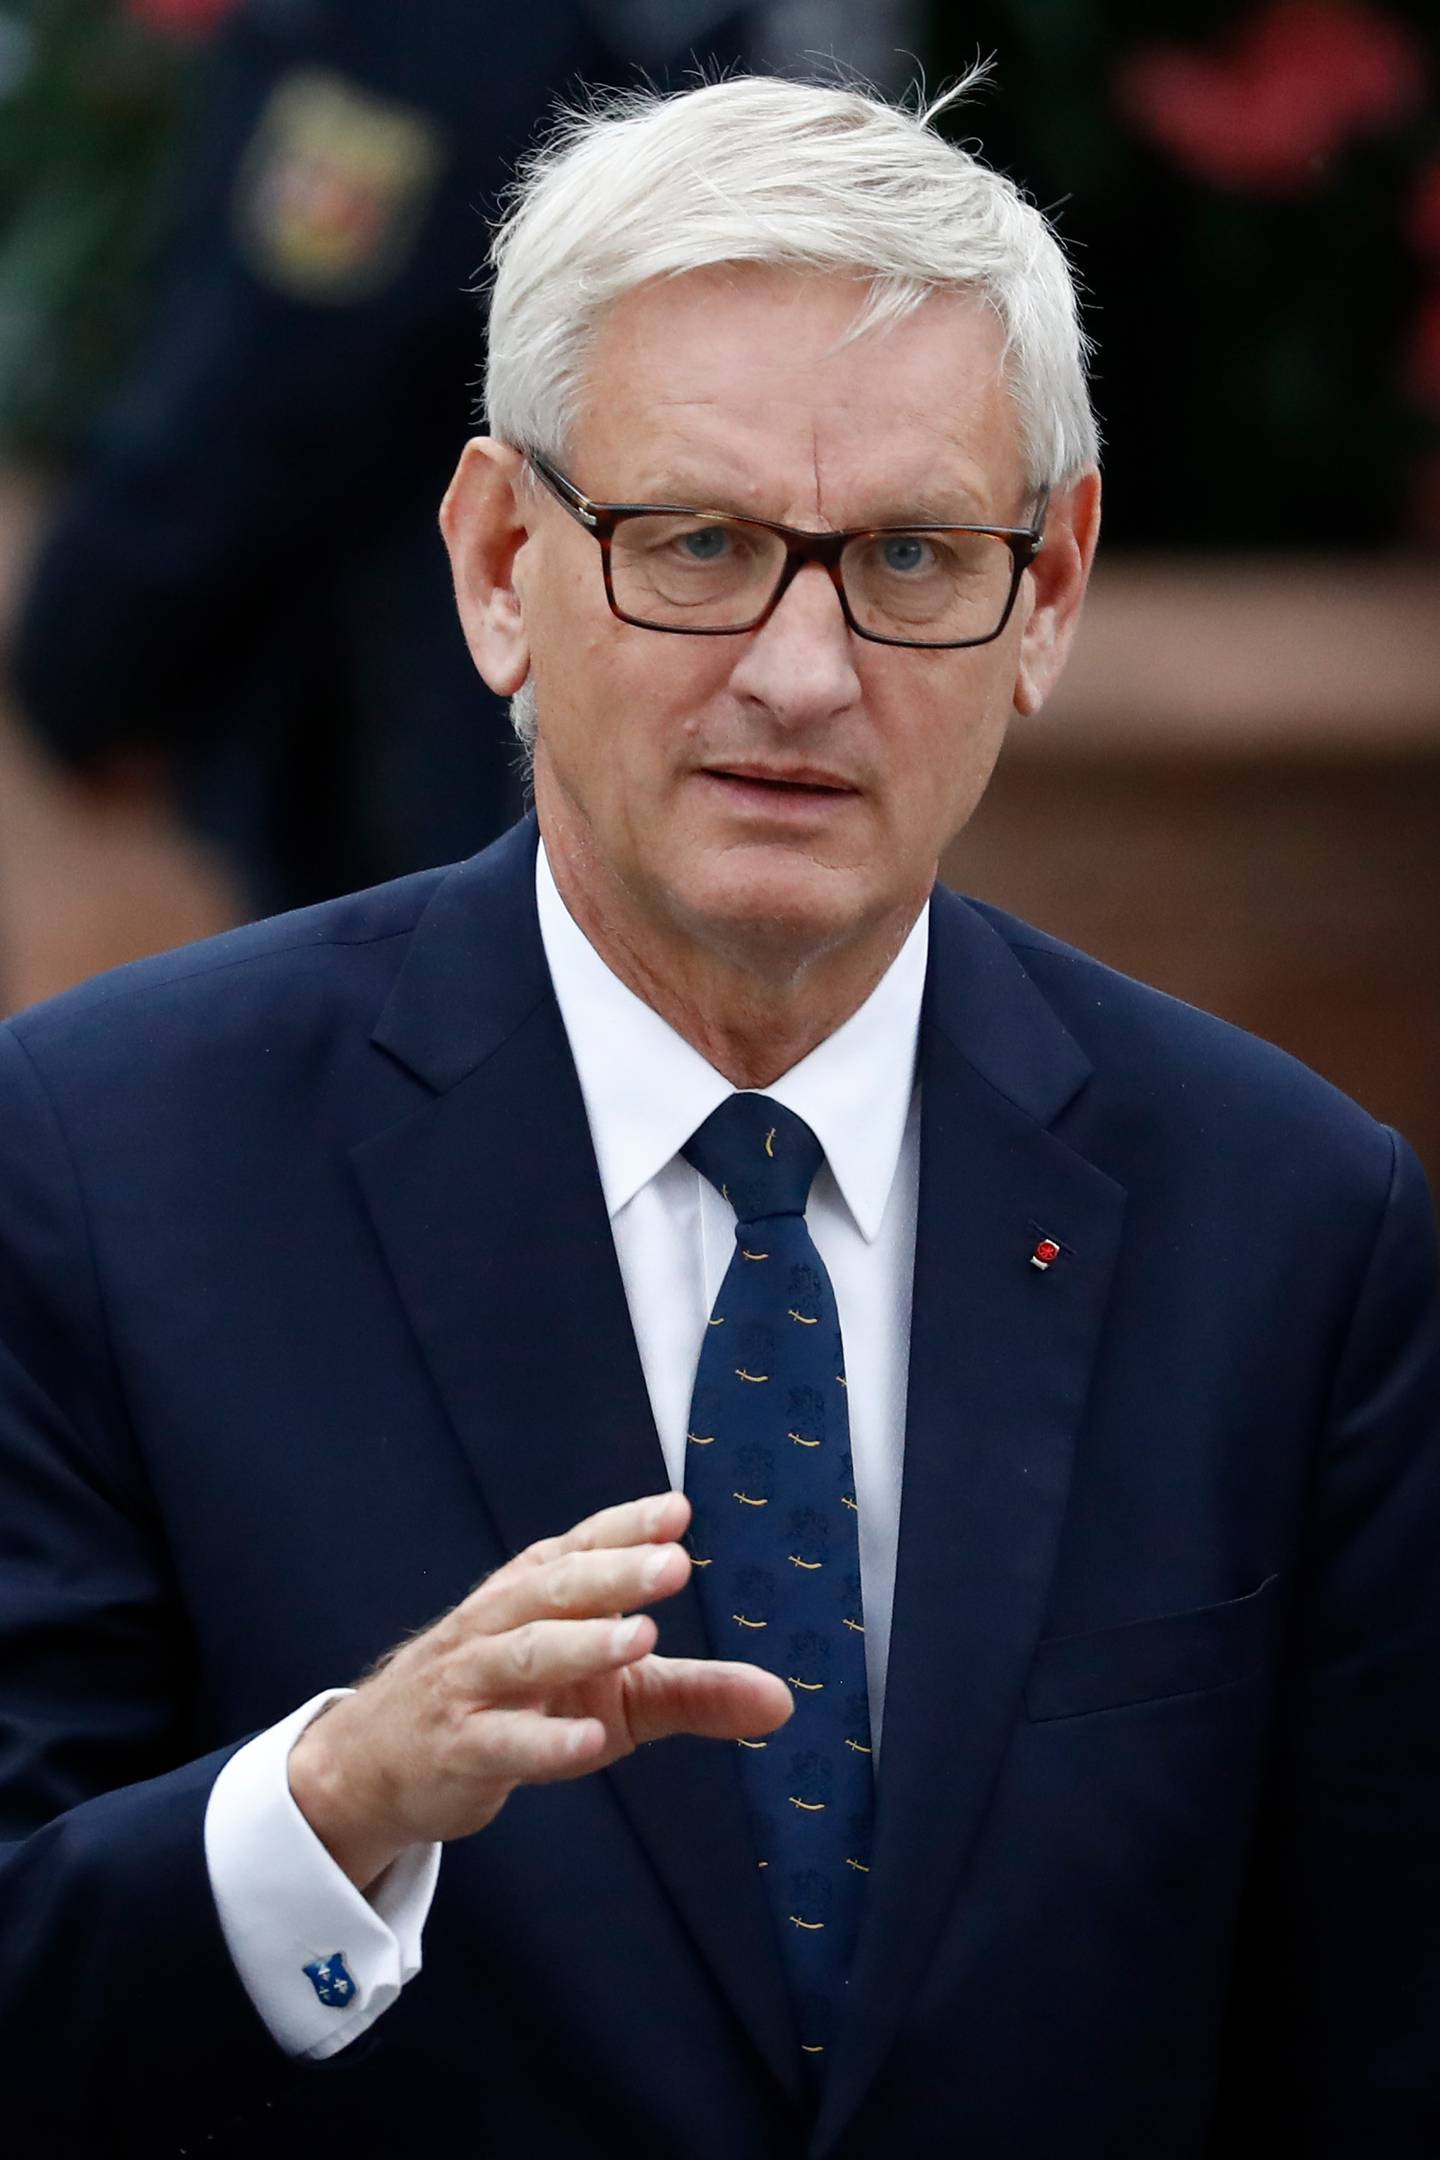 former Swedish Prime Minister Carl Bildt (C) arrives for a memorial service for late former Chancellor Helmut Kohl on July 1, 2017 at the cathedral in Speyer.